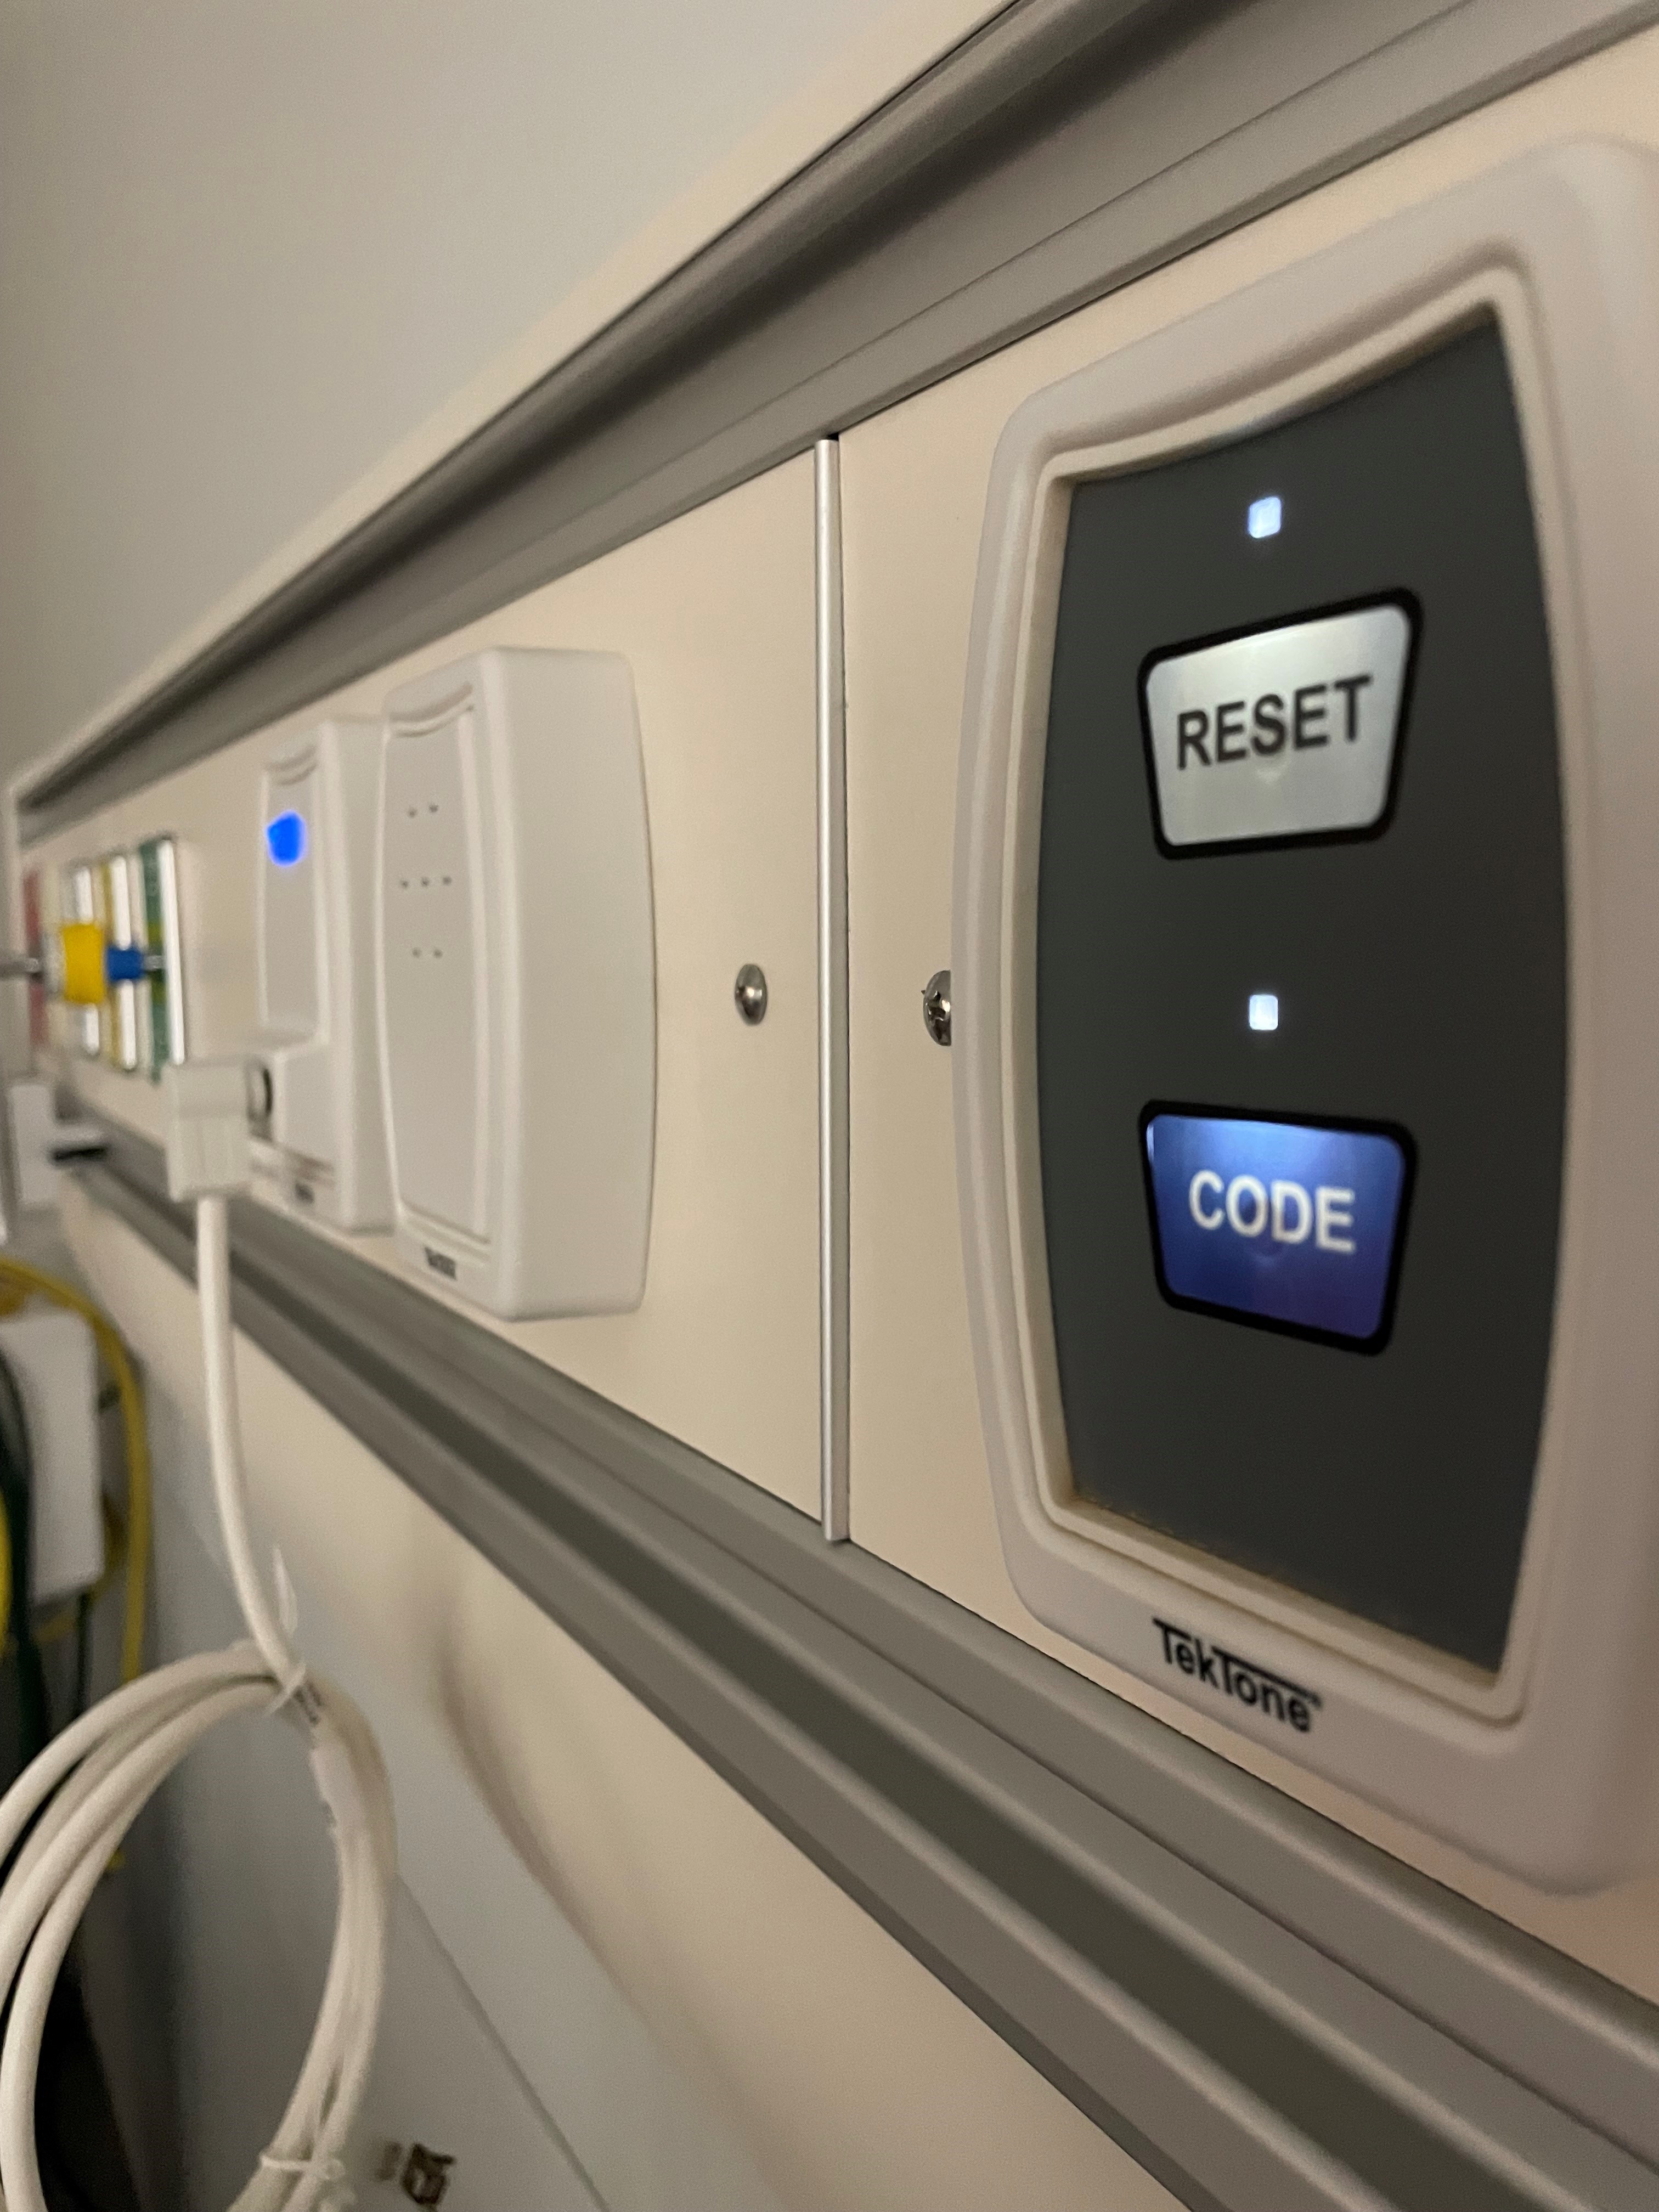 This is the Tek-CARE® system TekTone installed in SCC’s Health Sciences Center.